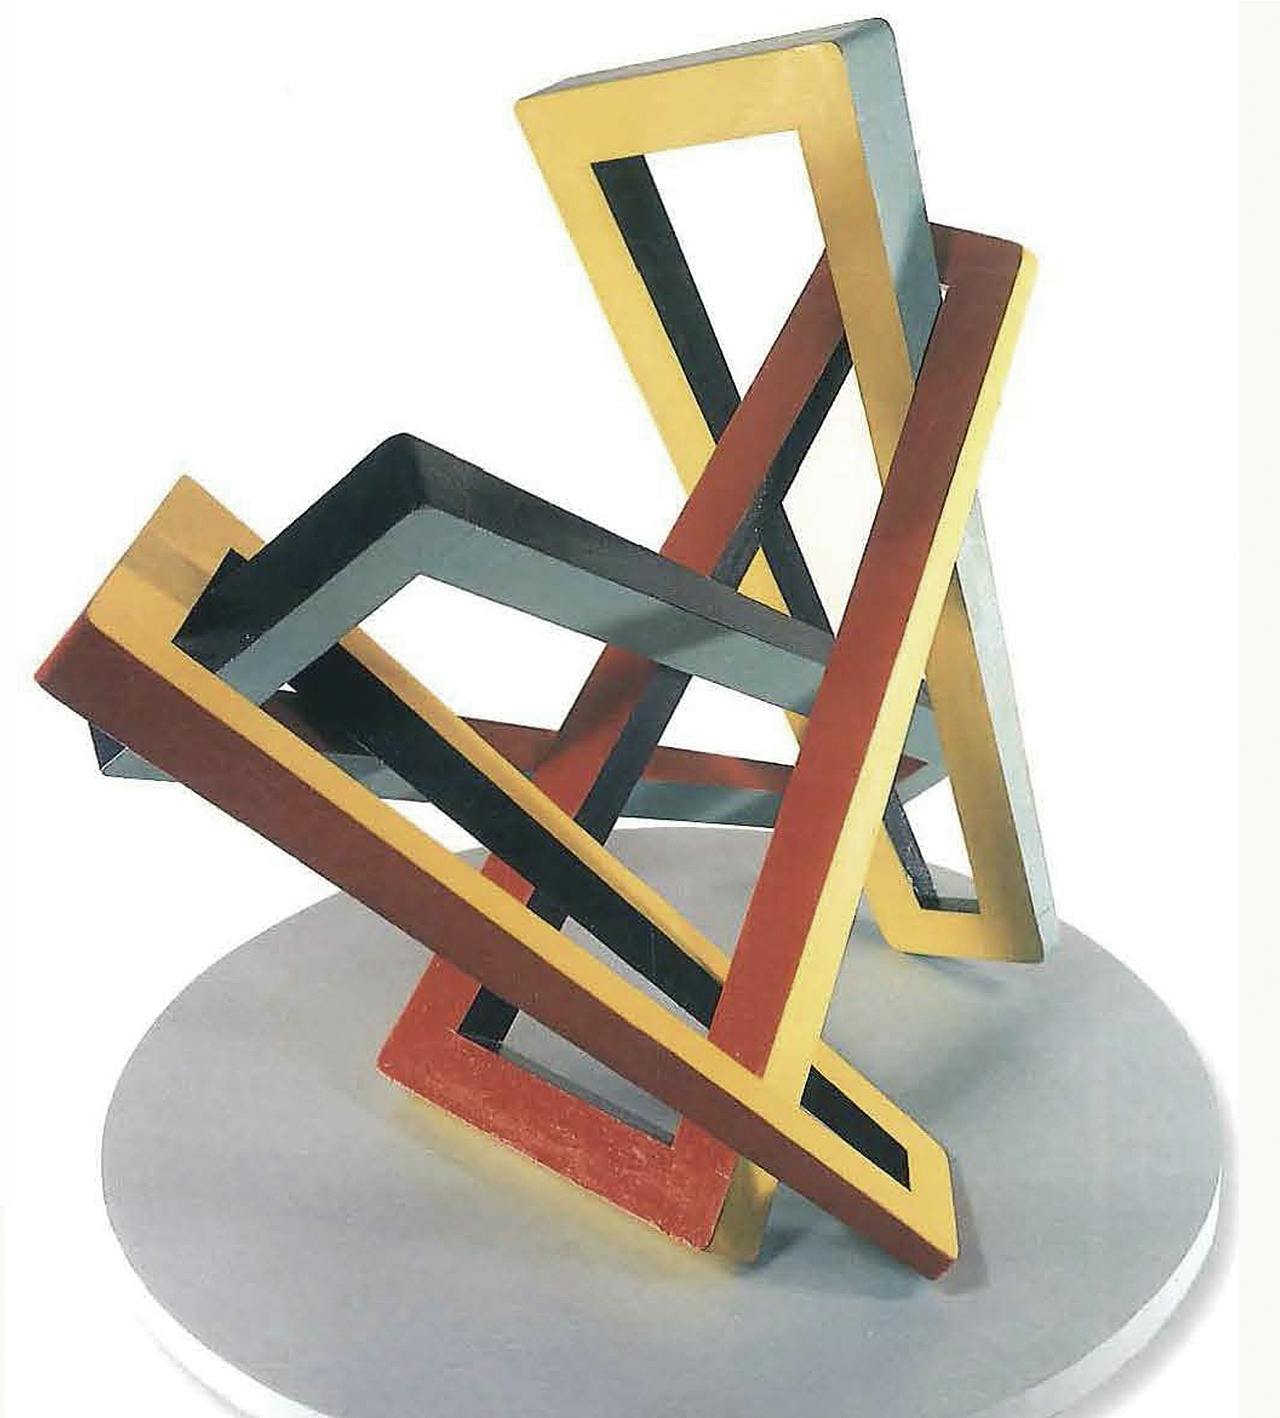 A geometric sculpture made of interlocking, wood rectangles painted black, yellow, and red.